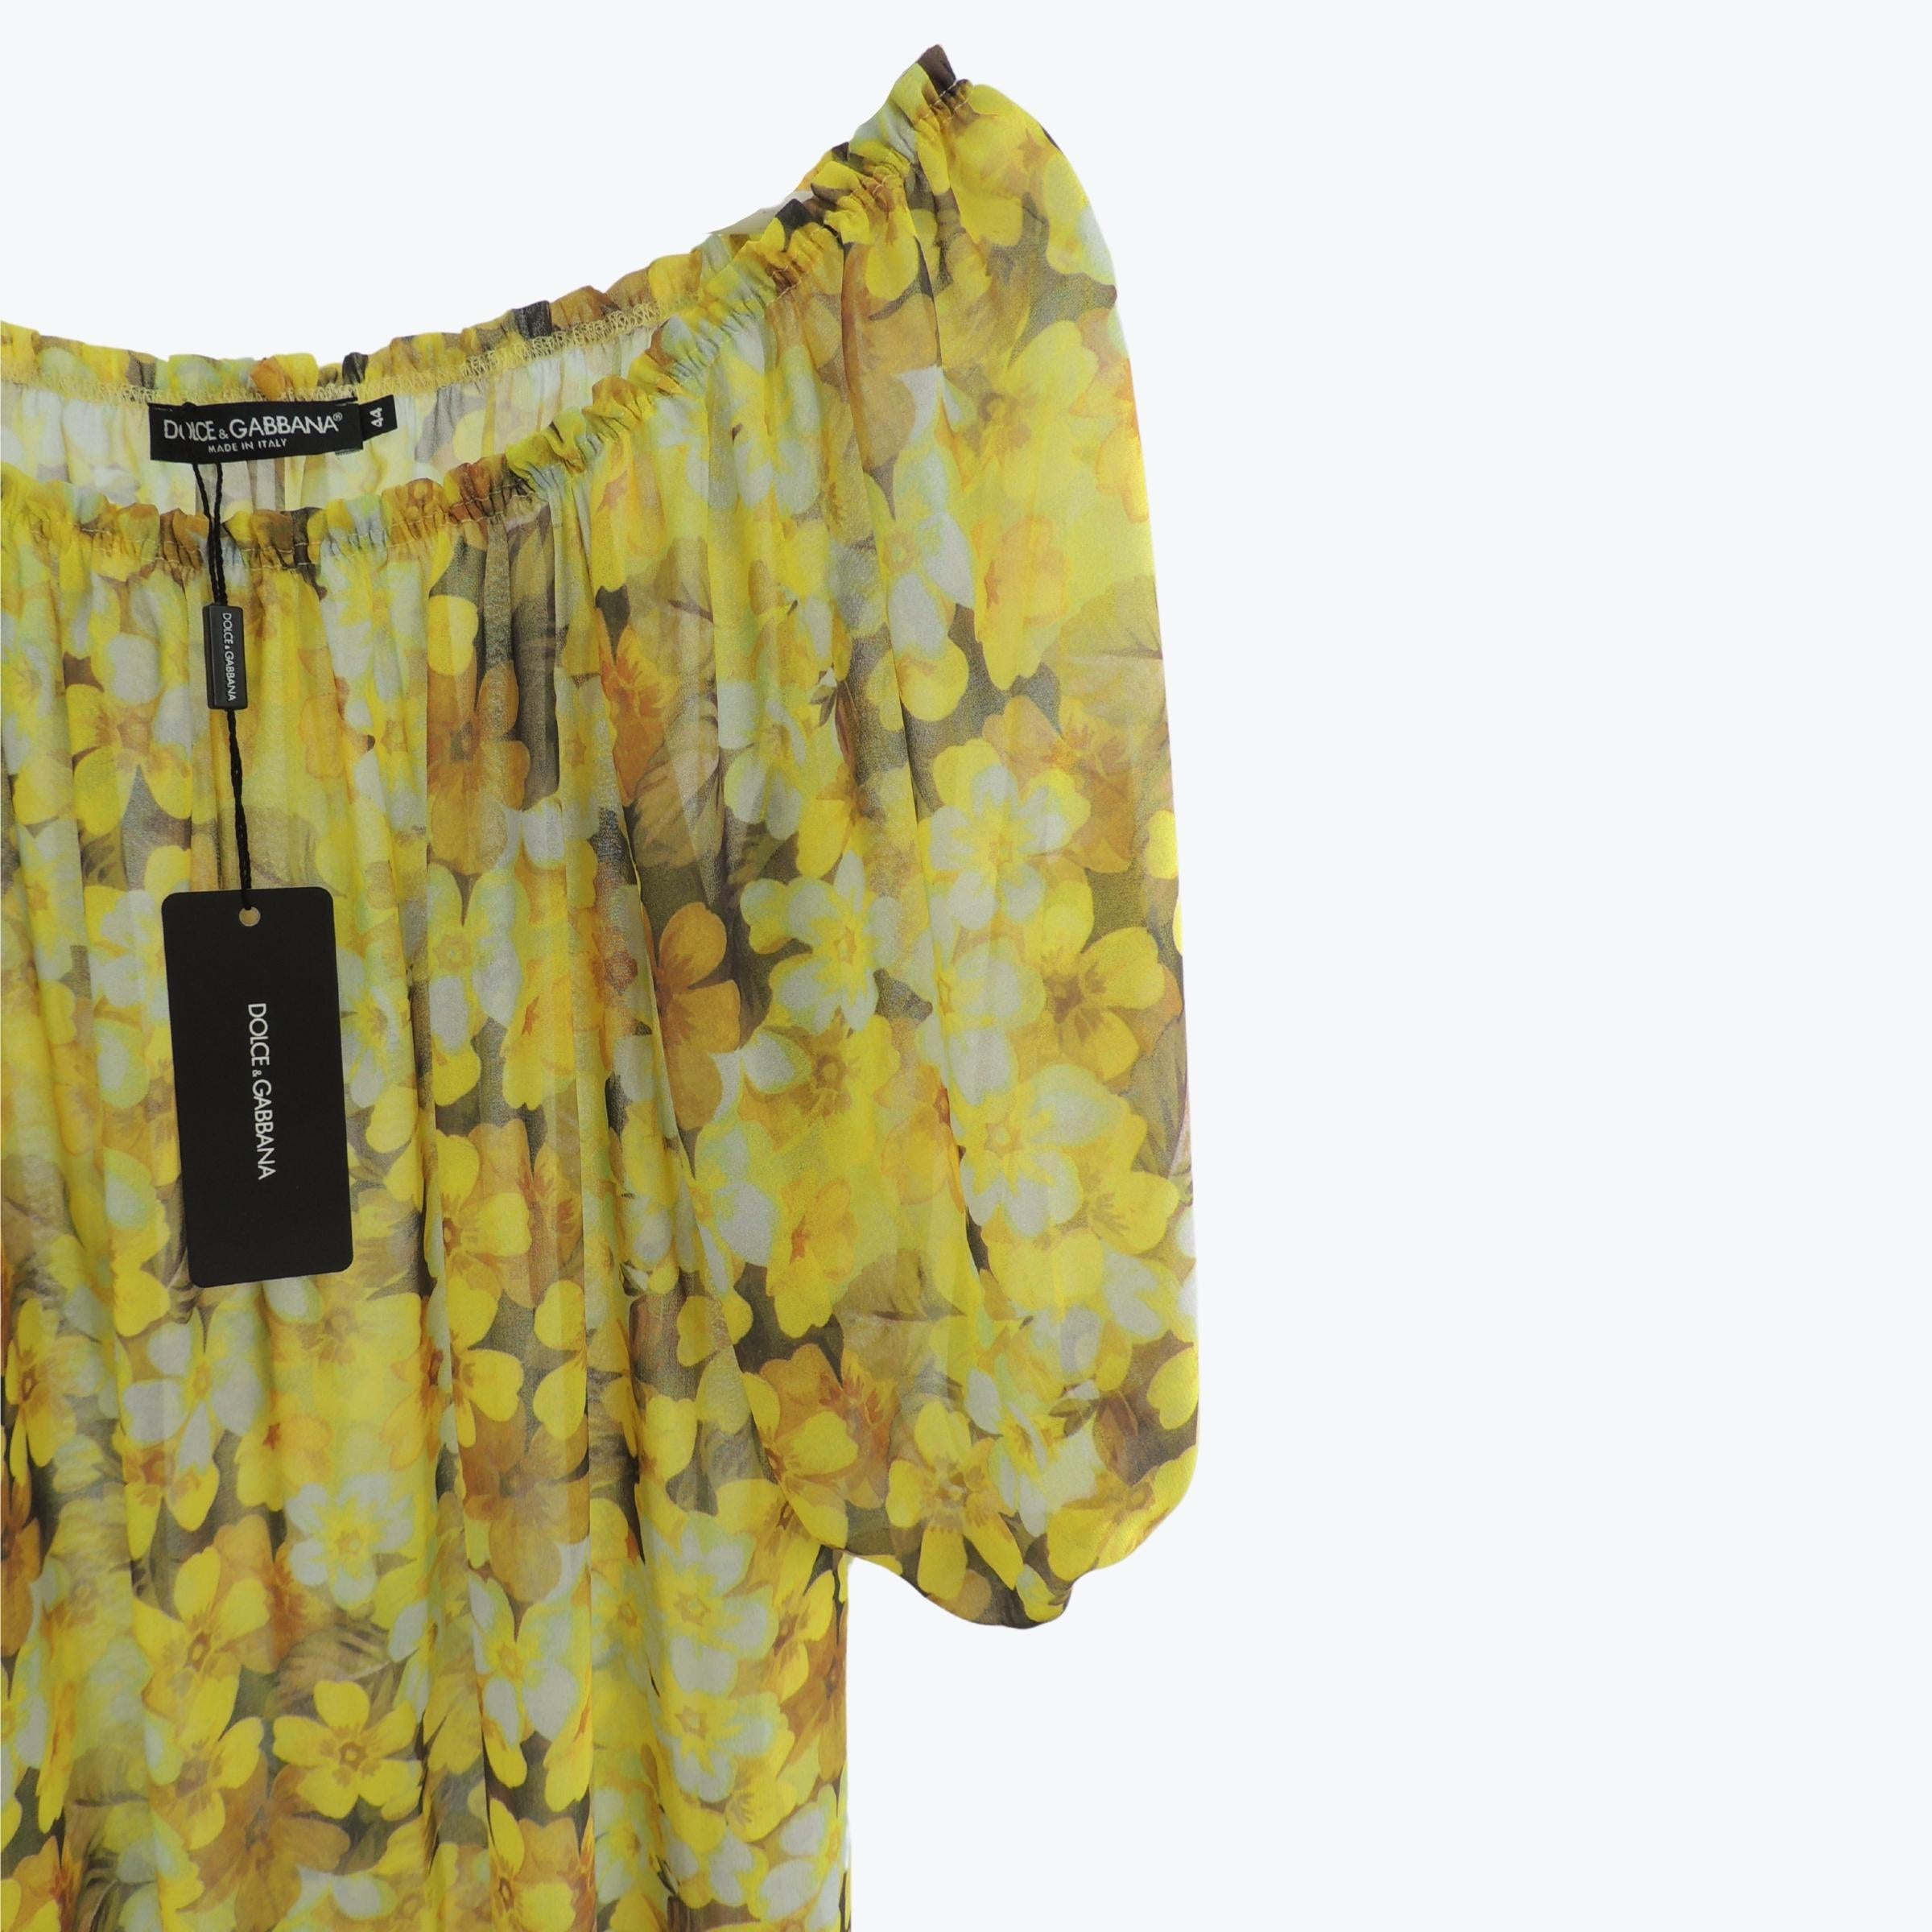 Dolce & Gabbana Floral Transparent Blouse in Yellow UK 16